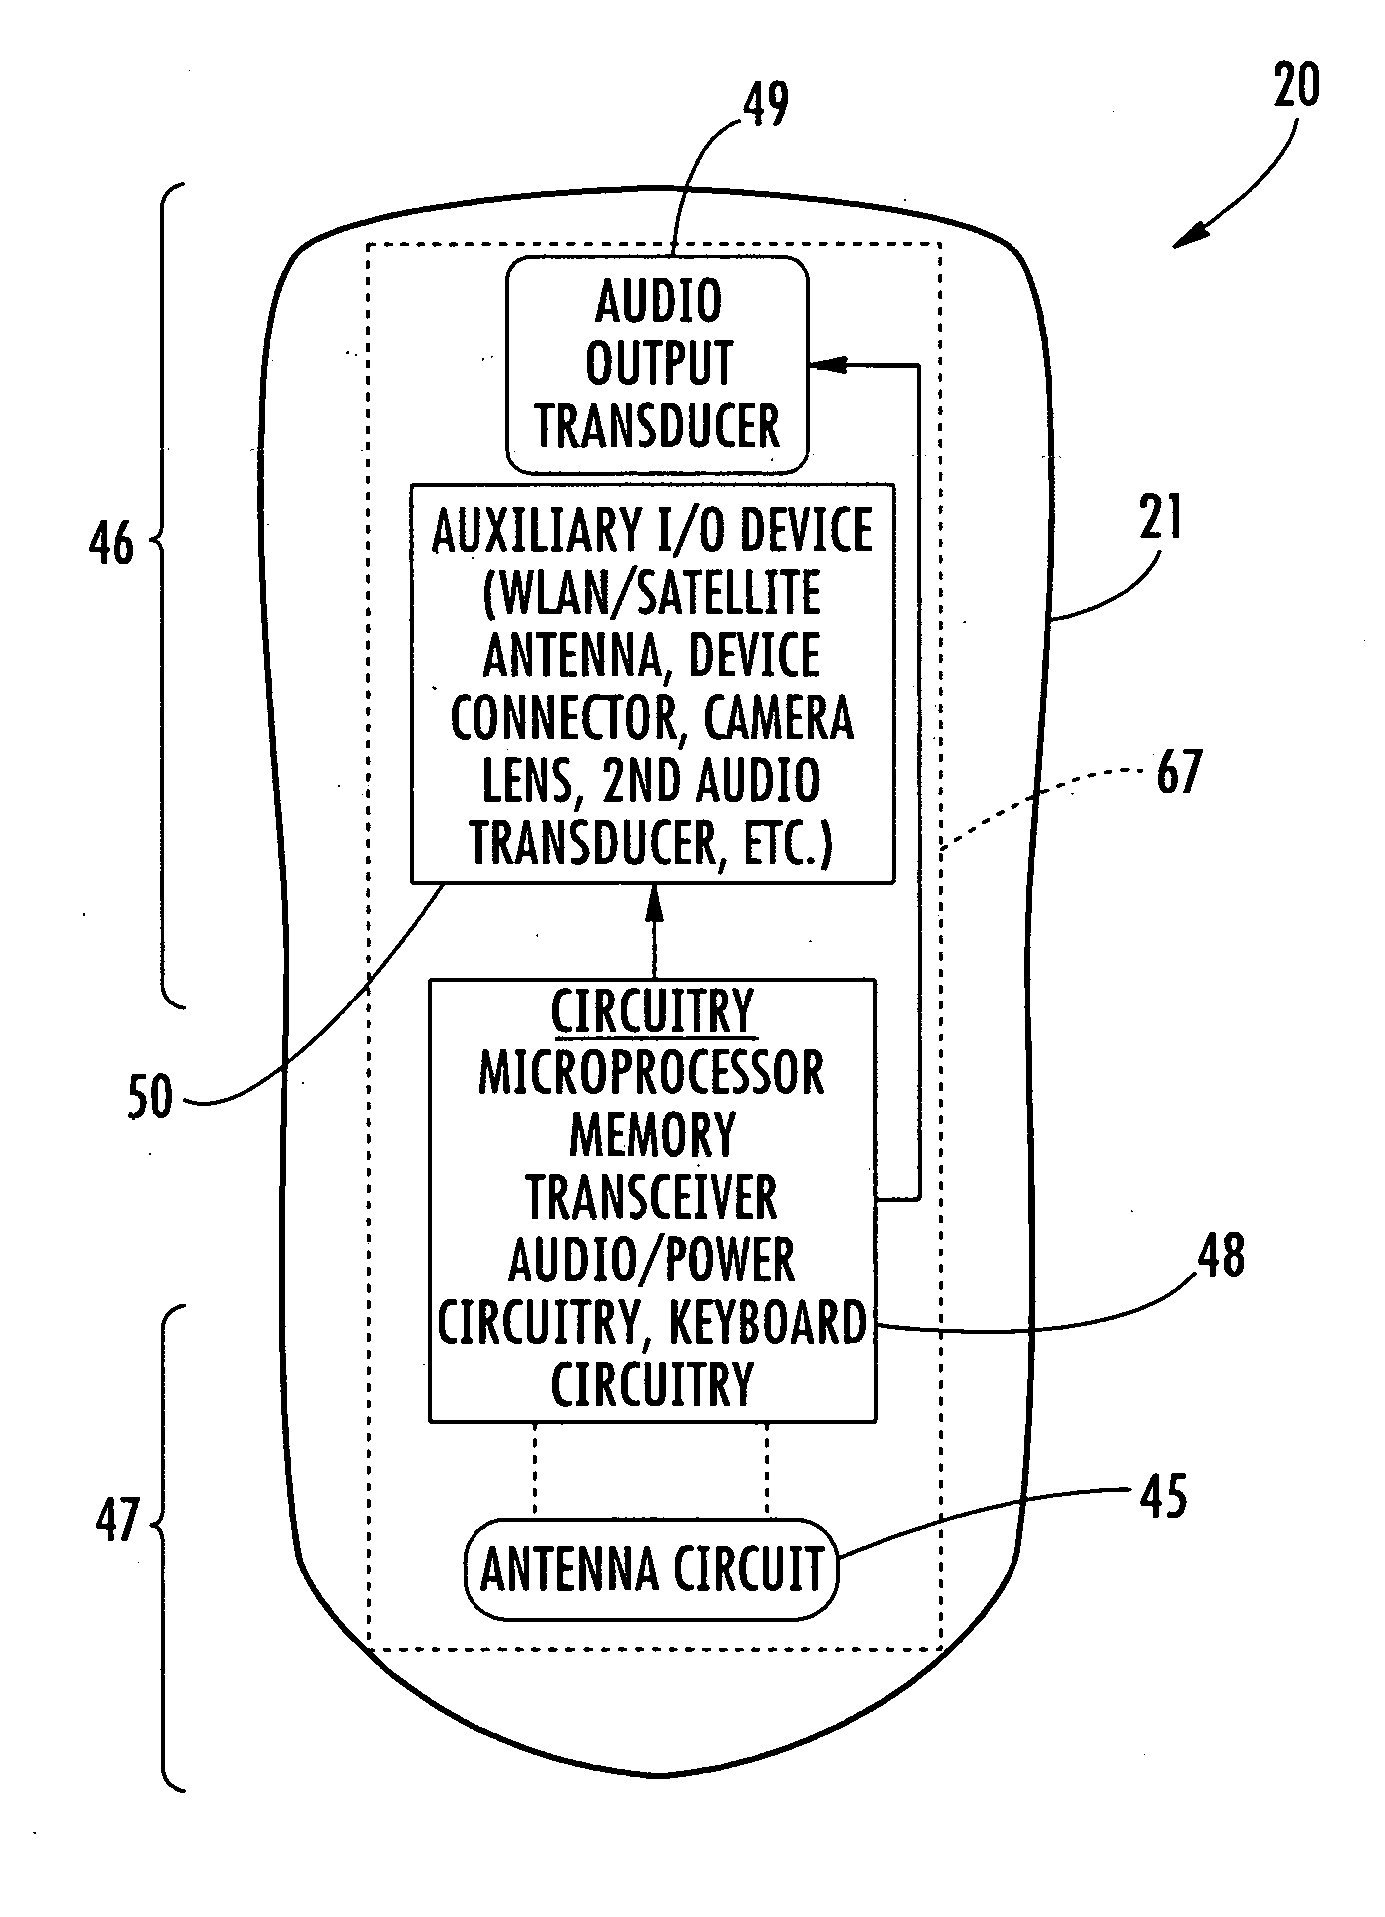 Mobile wireless communications device with reduced interference from the keyboard into the radio receiver